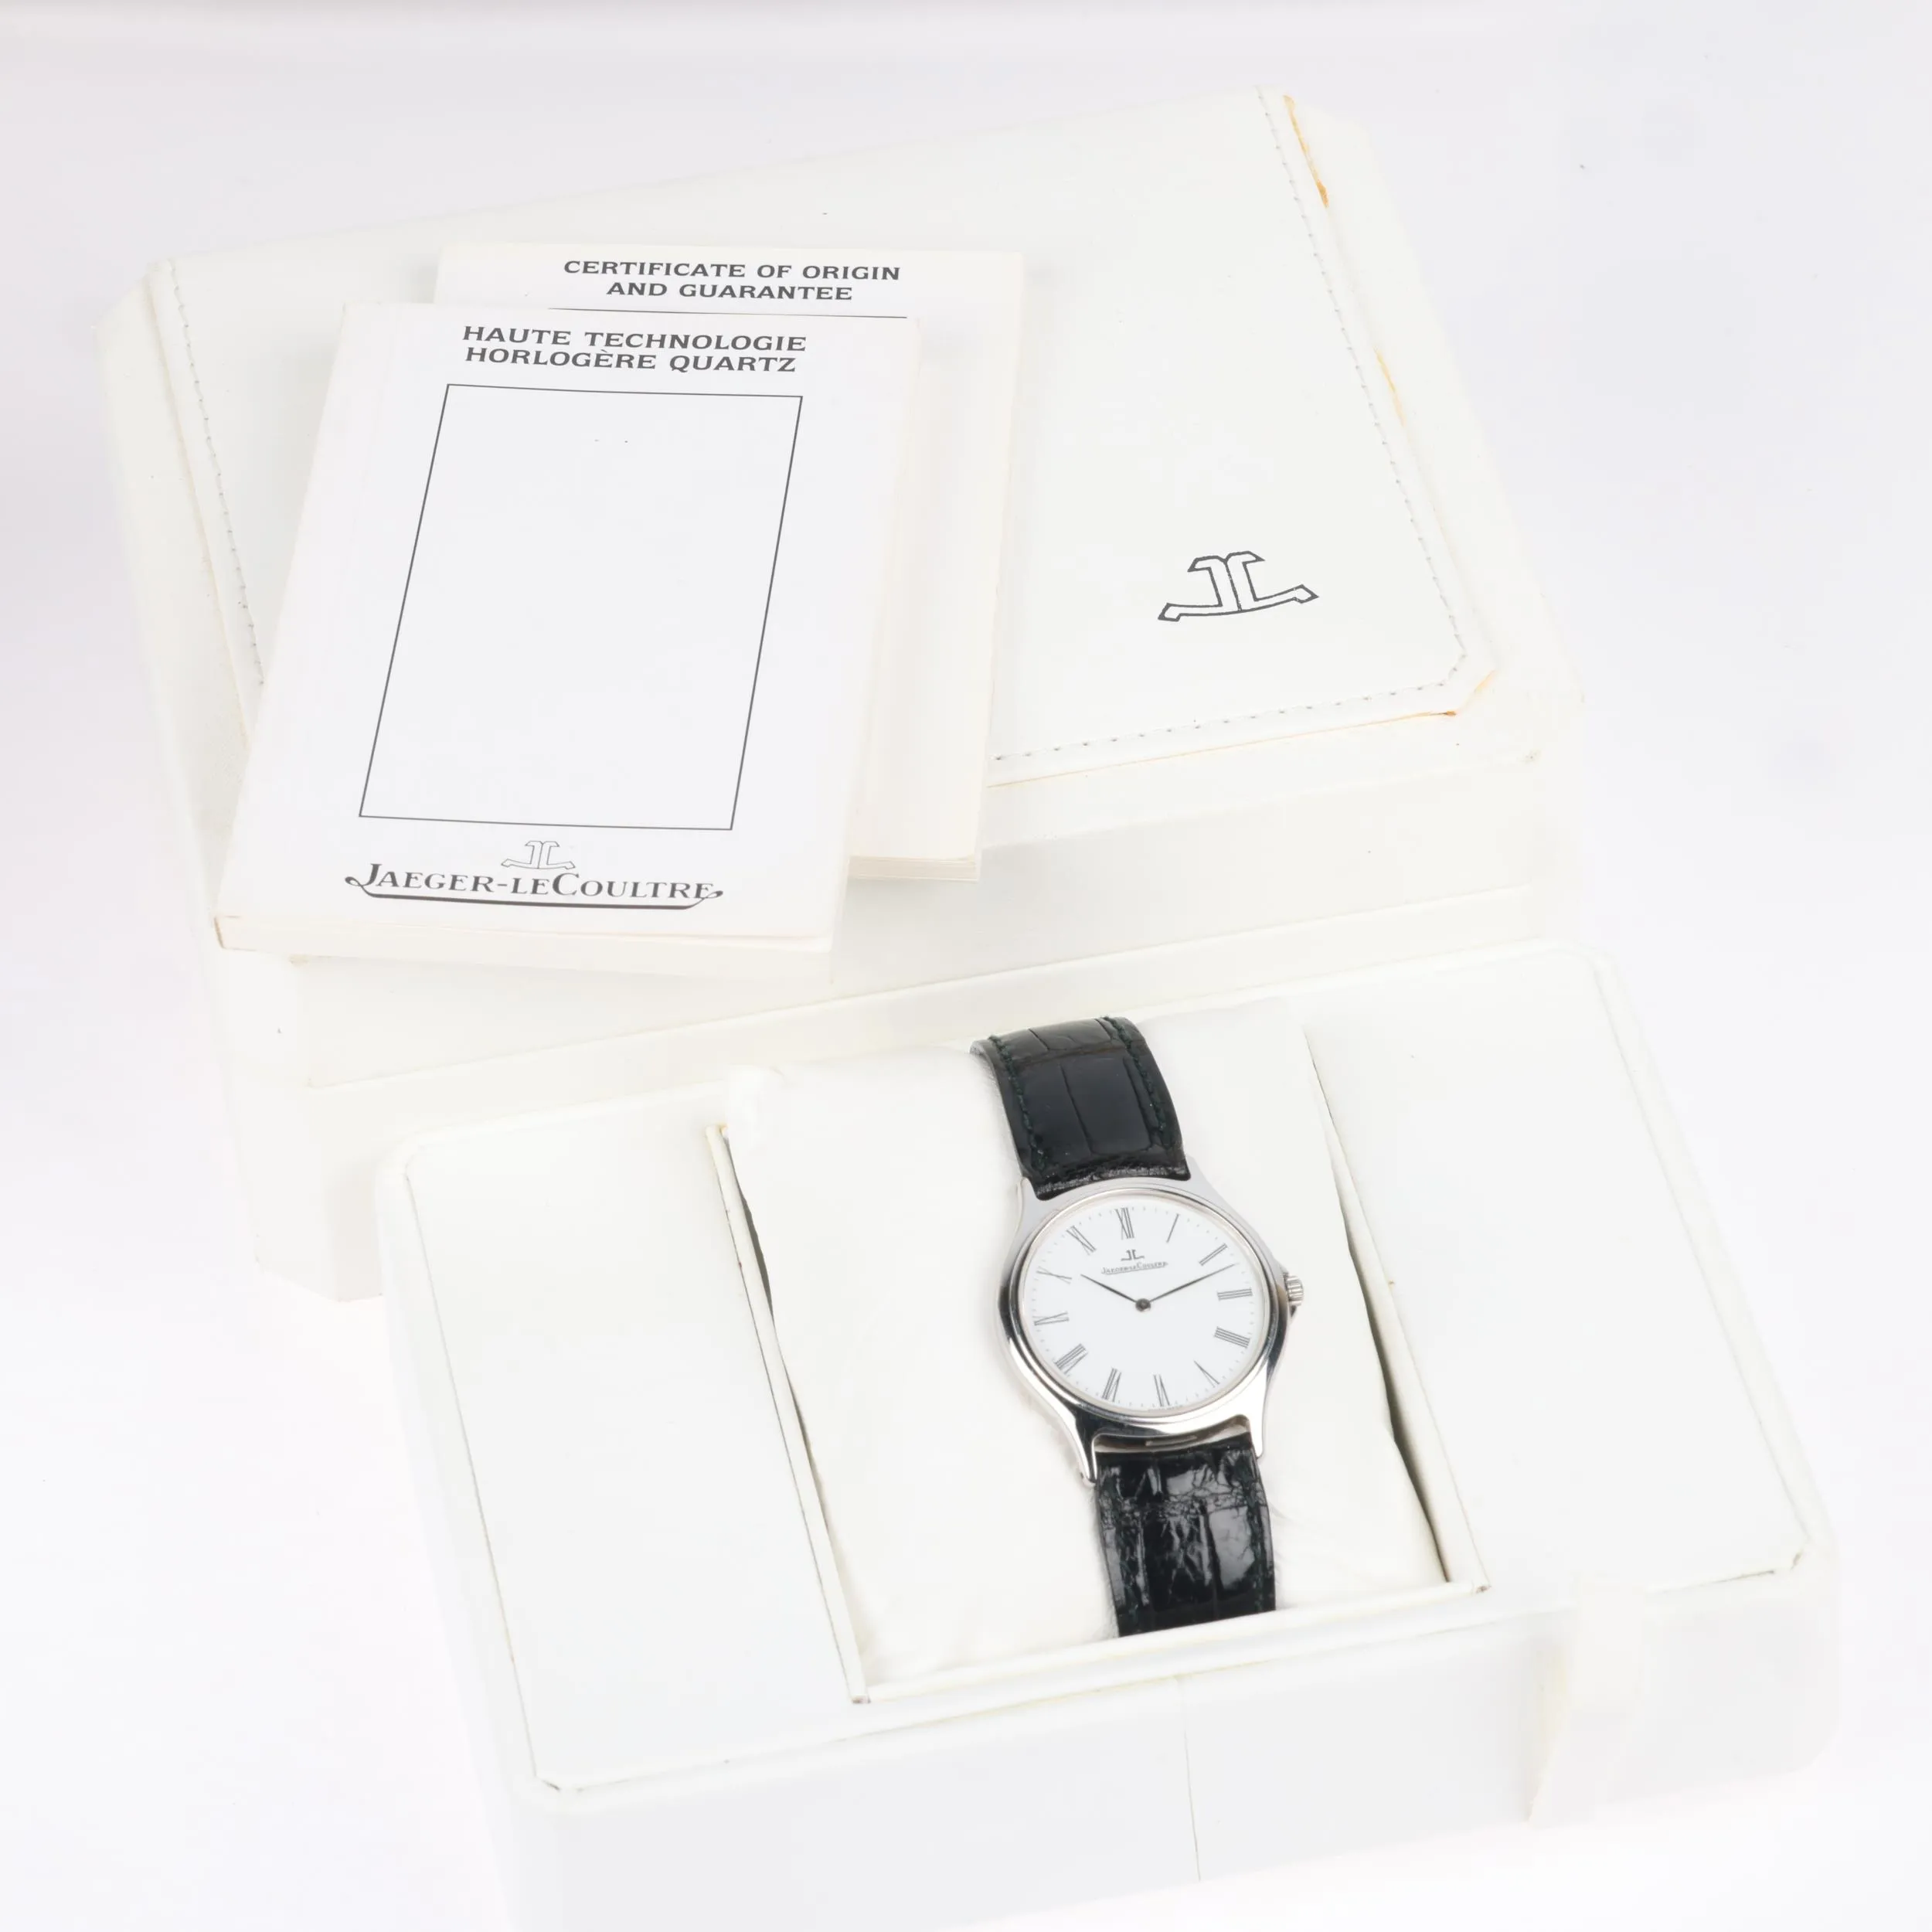 Jaeger-LeCoultre Heraion 112.8.08 34mm Stainless steel White 4